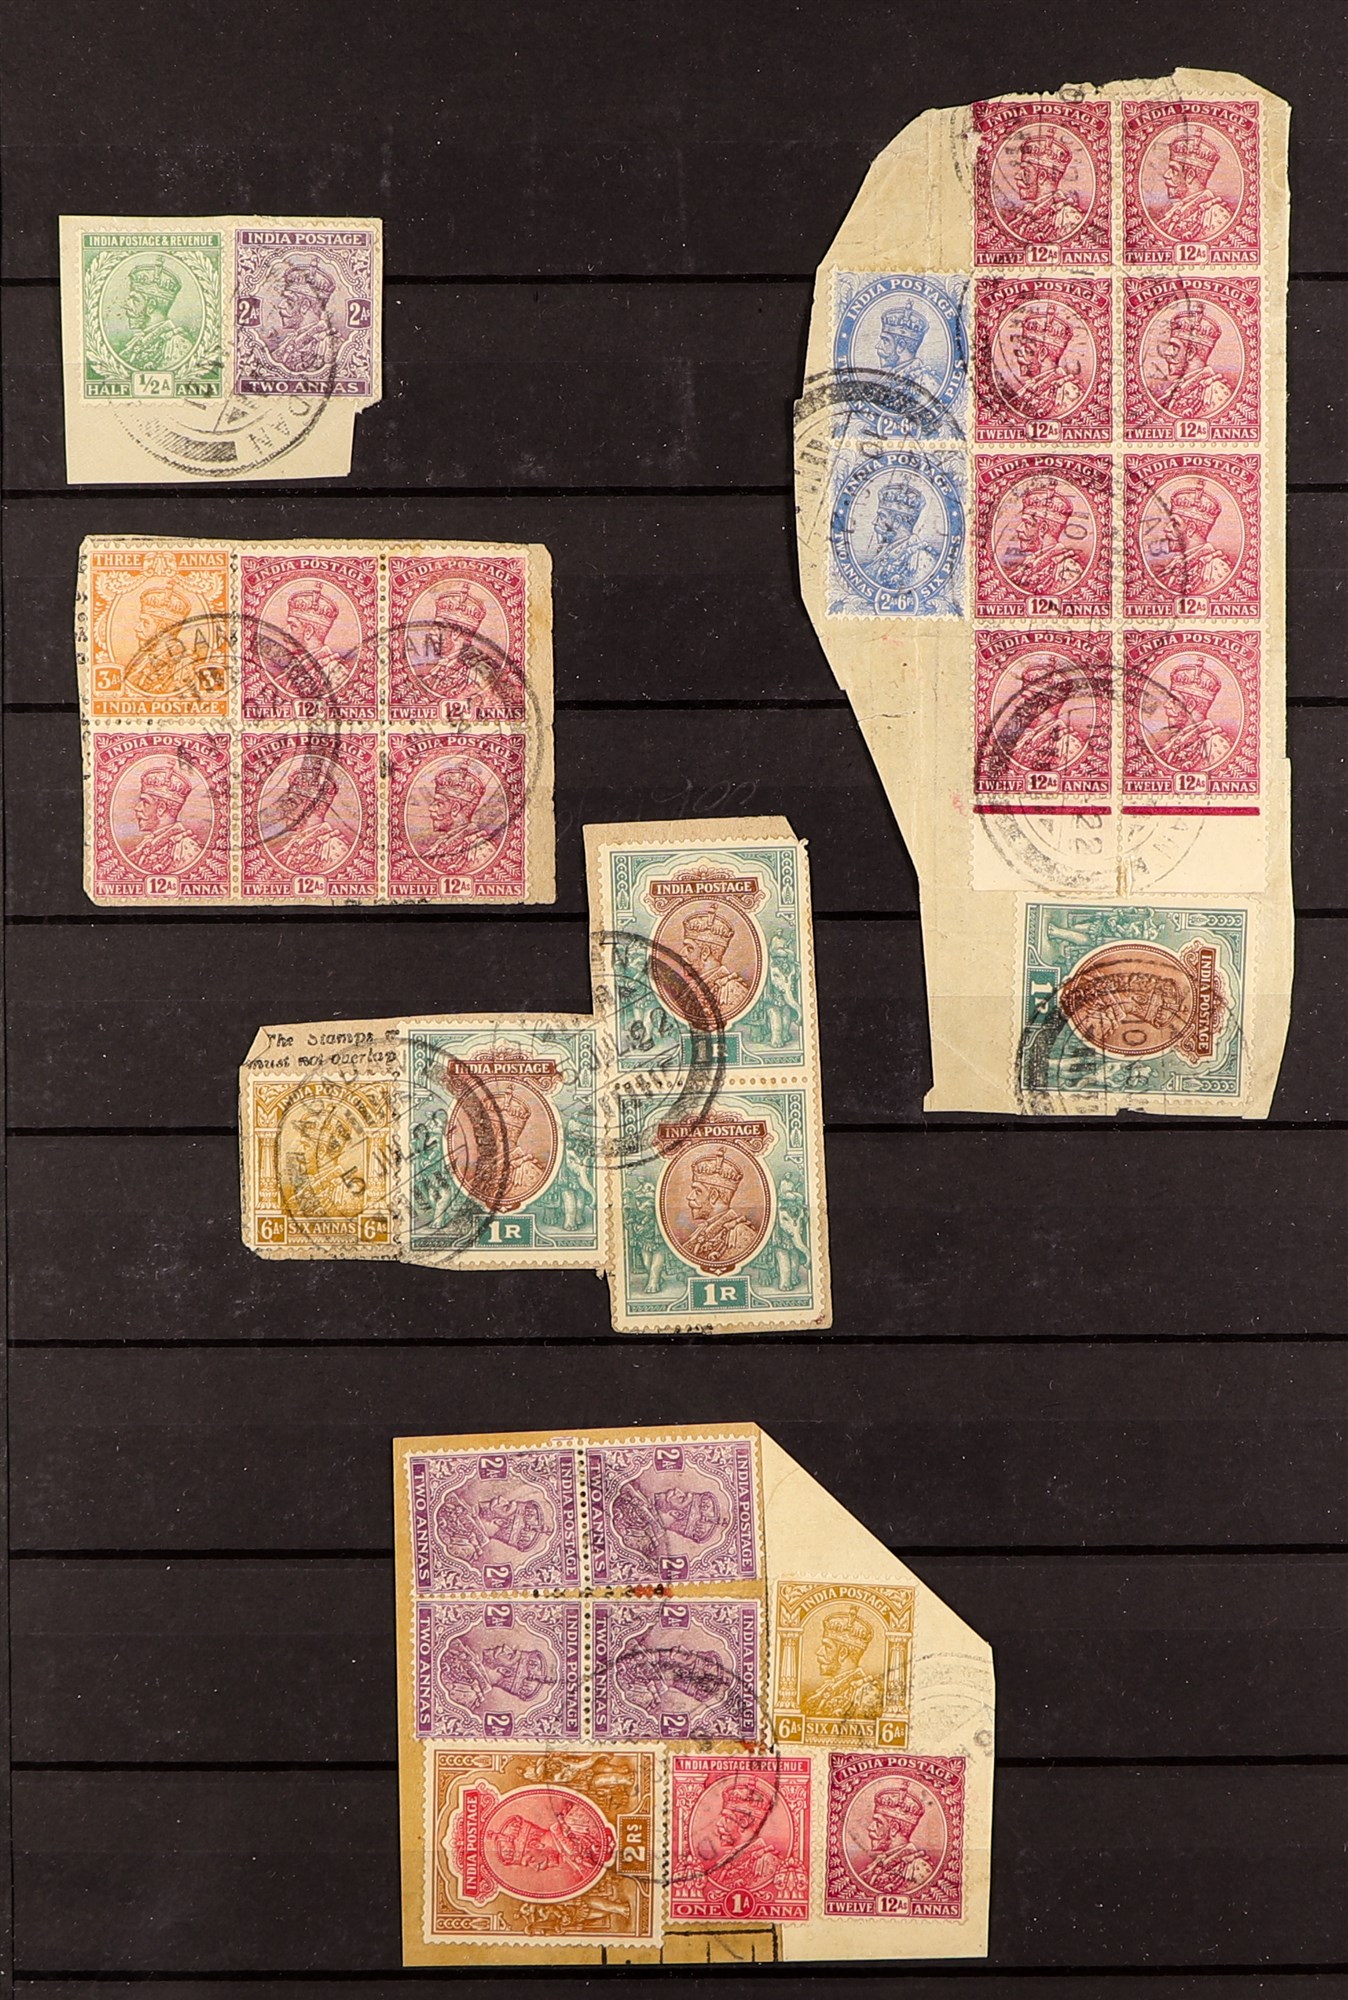 INDIA INDIA USED IN ABADAN (PERSIA) 31 examples of 1920's Indian stamps, tied to pieces by "